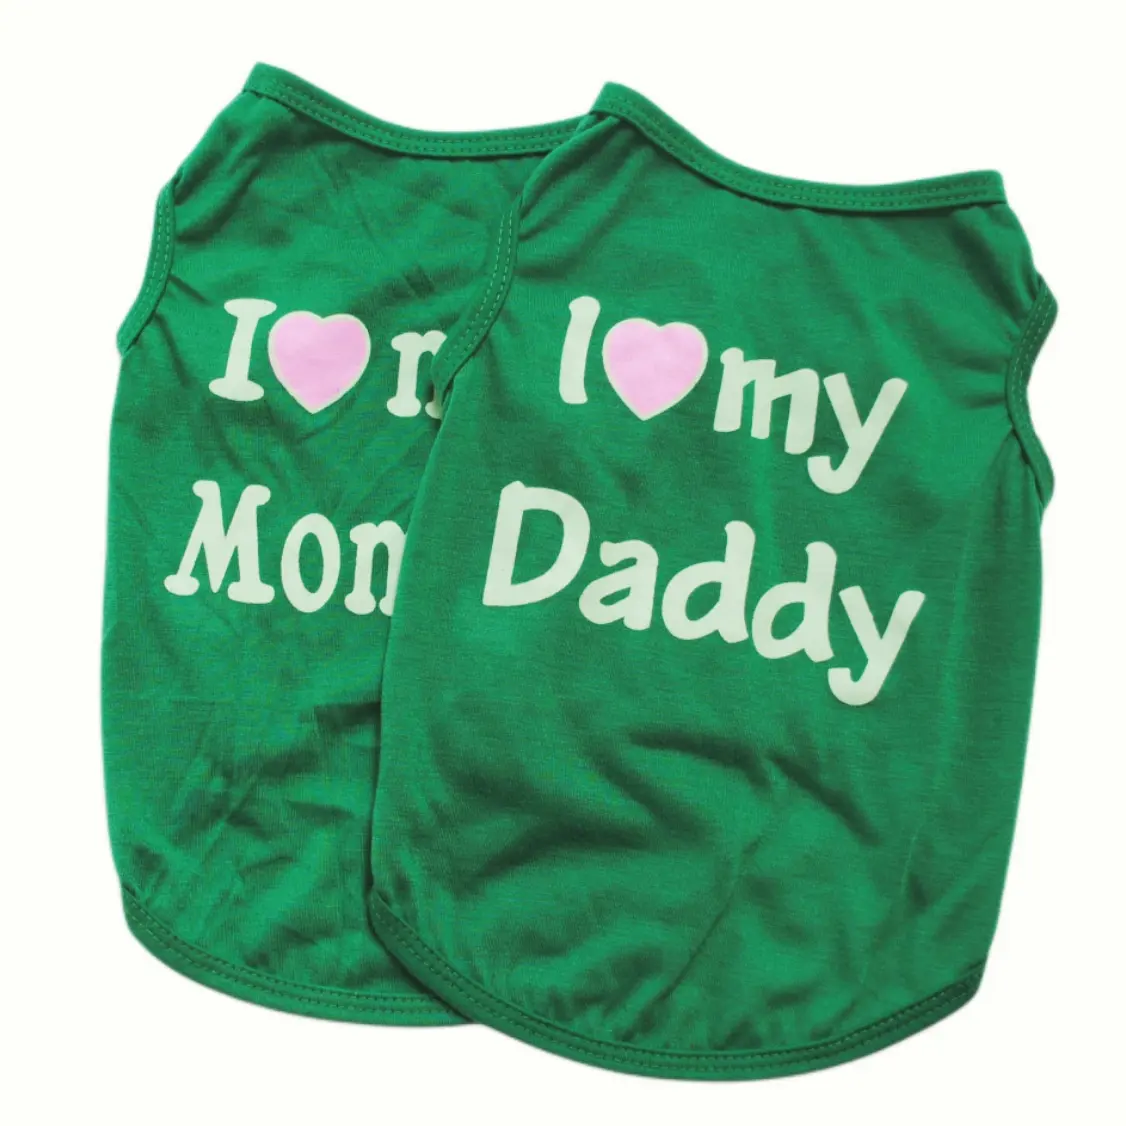 Pet Clothes Casual Puppy Dog Cat Clothing I Love Mommy & Daddy Print Cat Vest Tee Shirt 100% Cotton T-shirt Cat Kitten Apparel